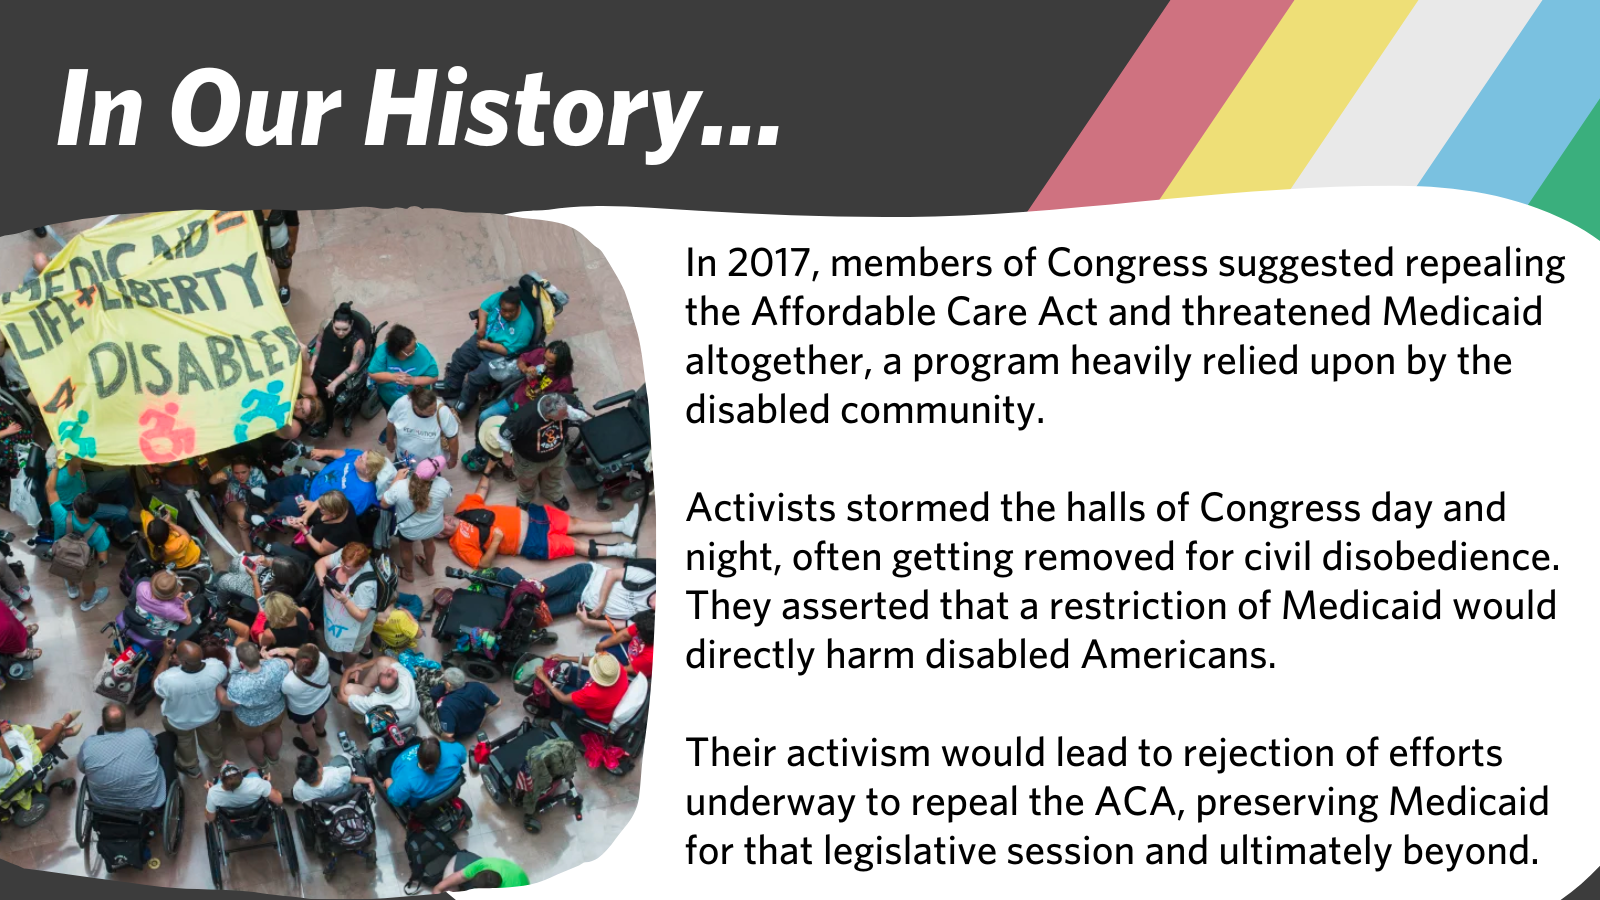 In Our History... In 2017, members of Congress suggested repealing the Affordable Care Act and threatened Medicaid altogether, a program heavily relied upon by the disabled community.